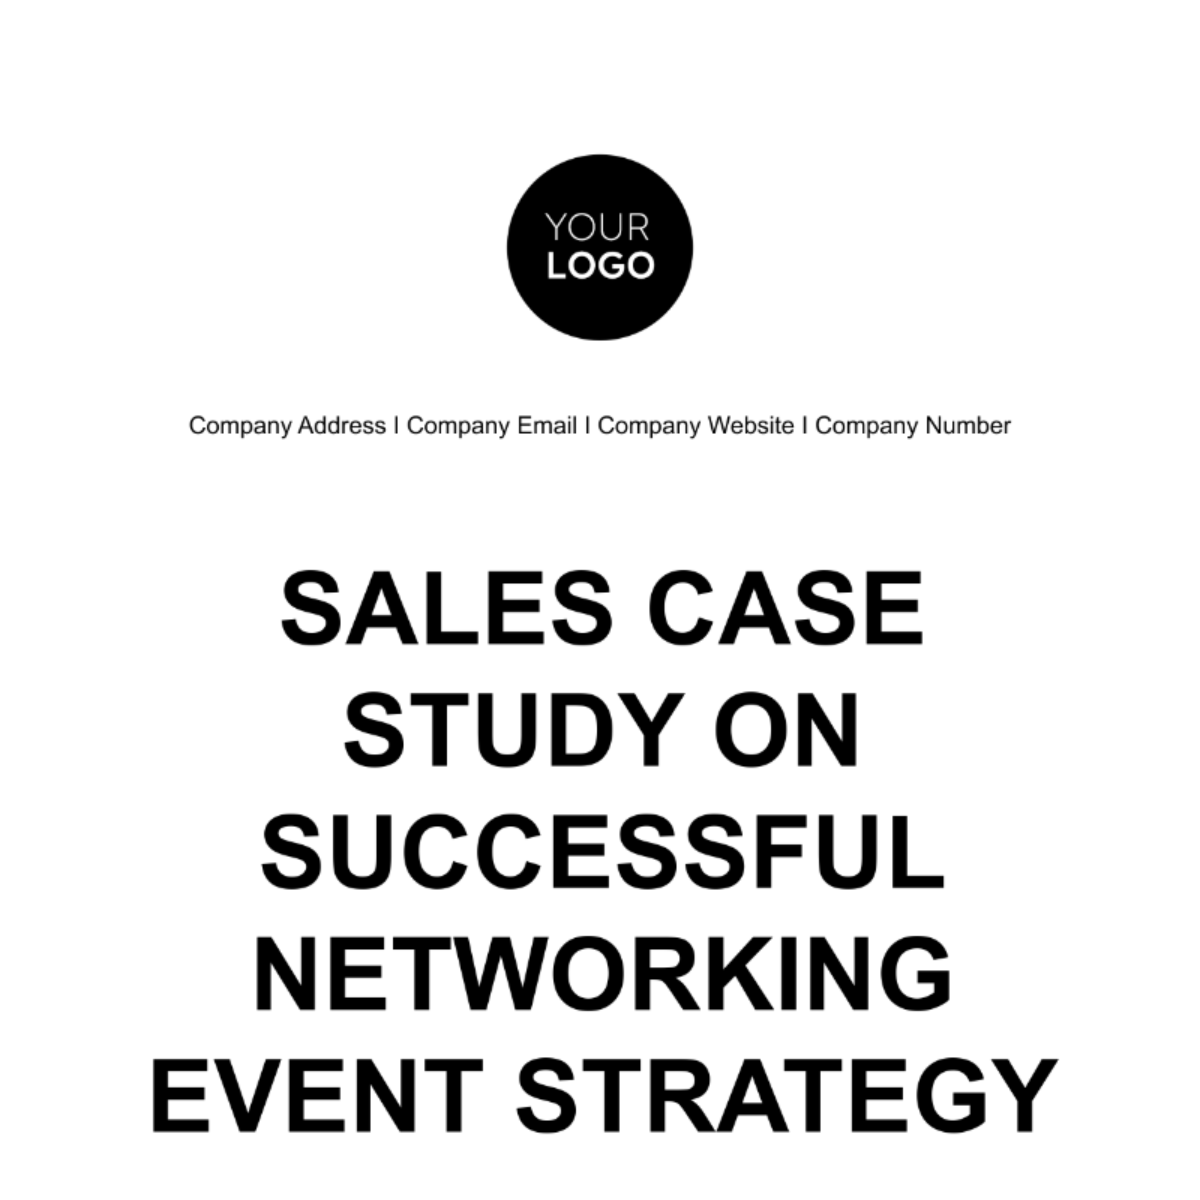 Sales Case Study on Successful Networking Event Strategy Template